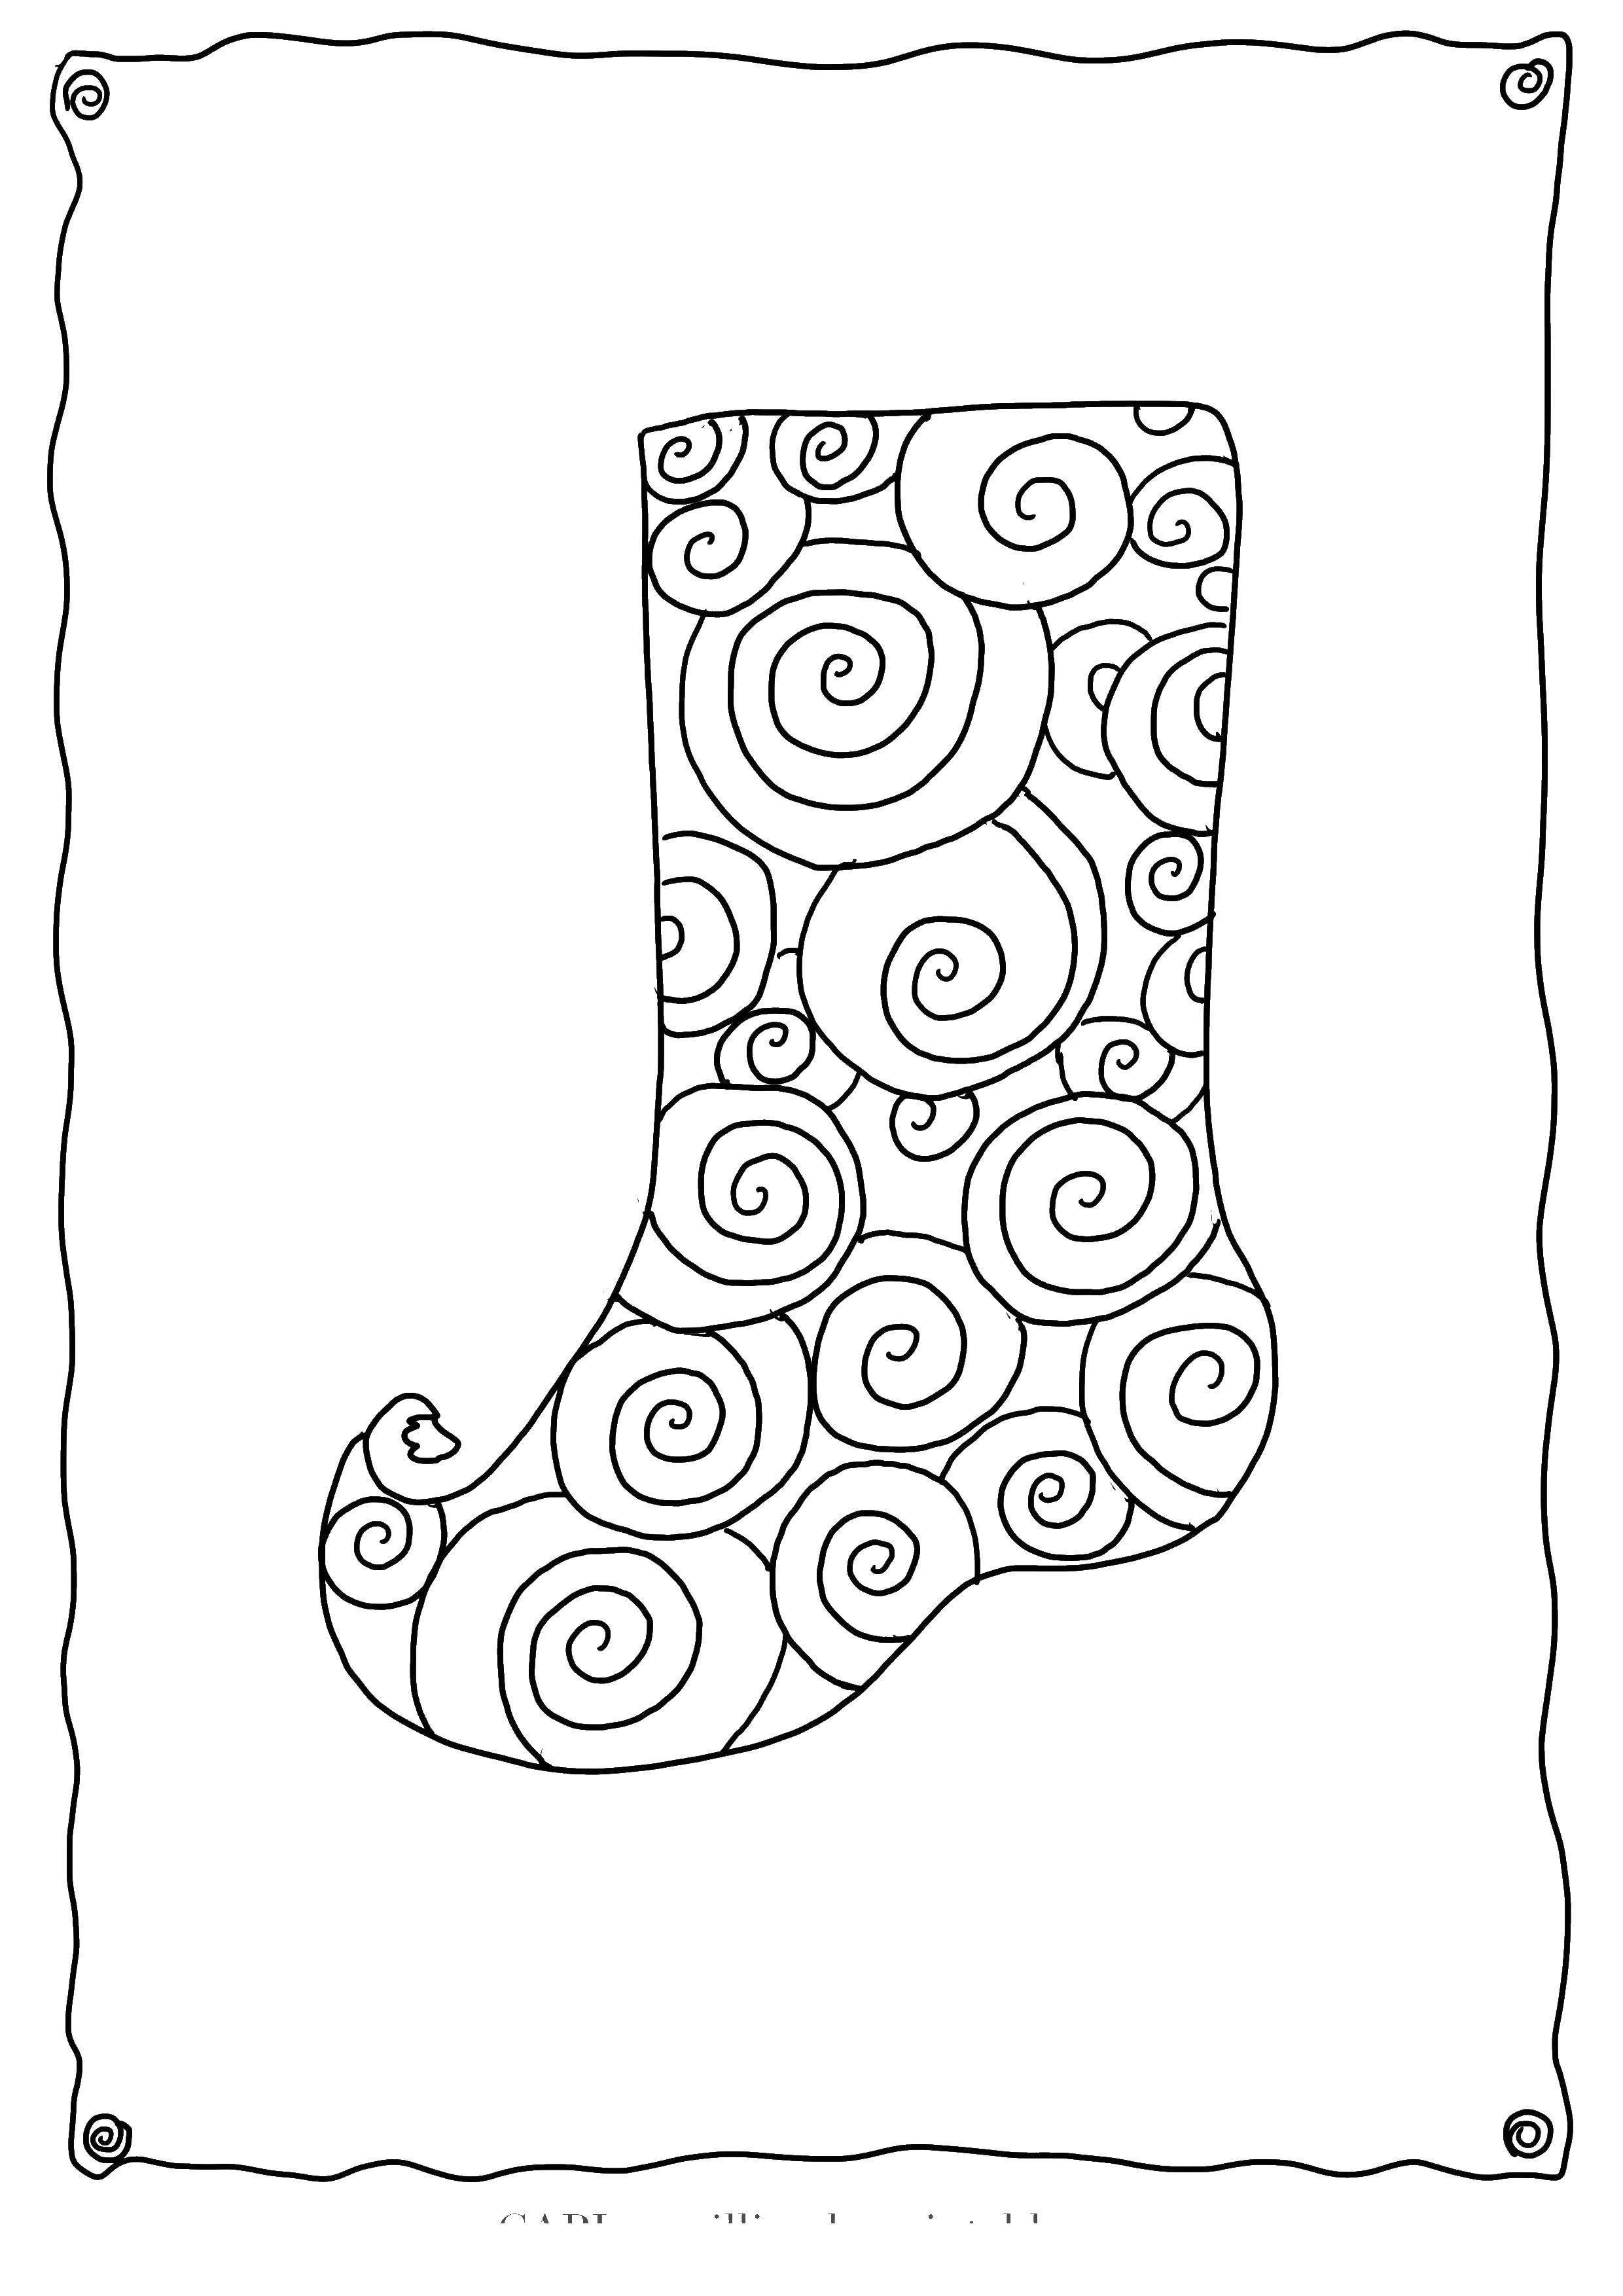 Coloring Patterned socks. Category Clothing. Tags:  clothing, socks.